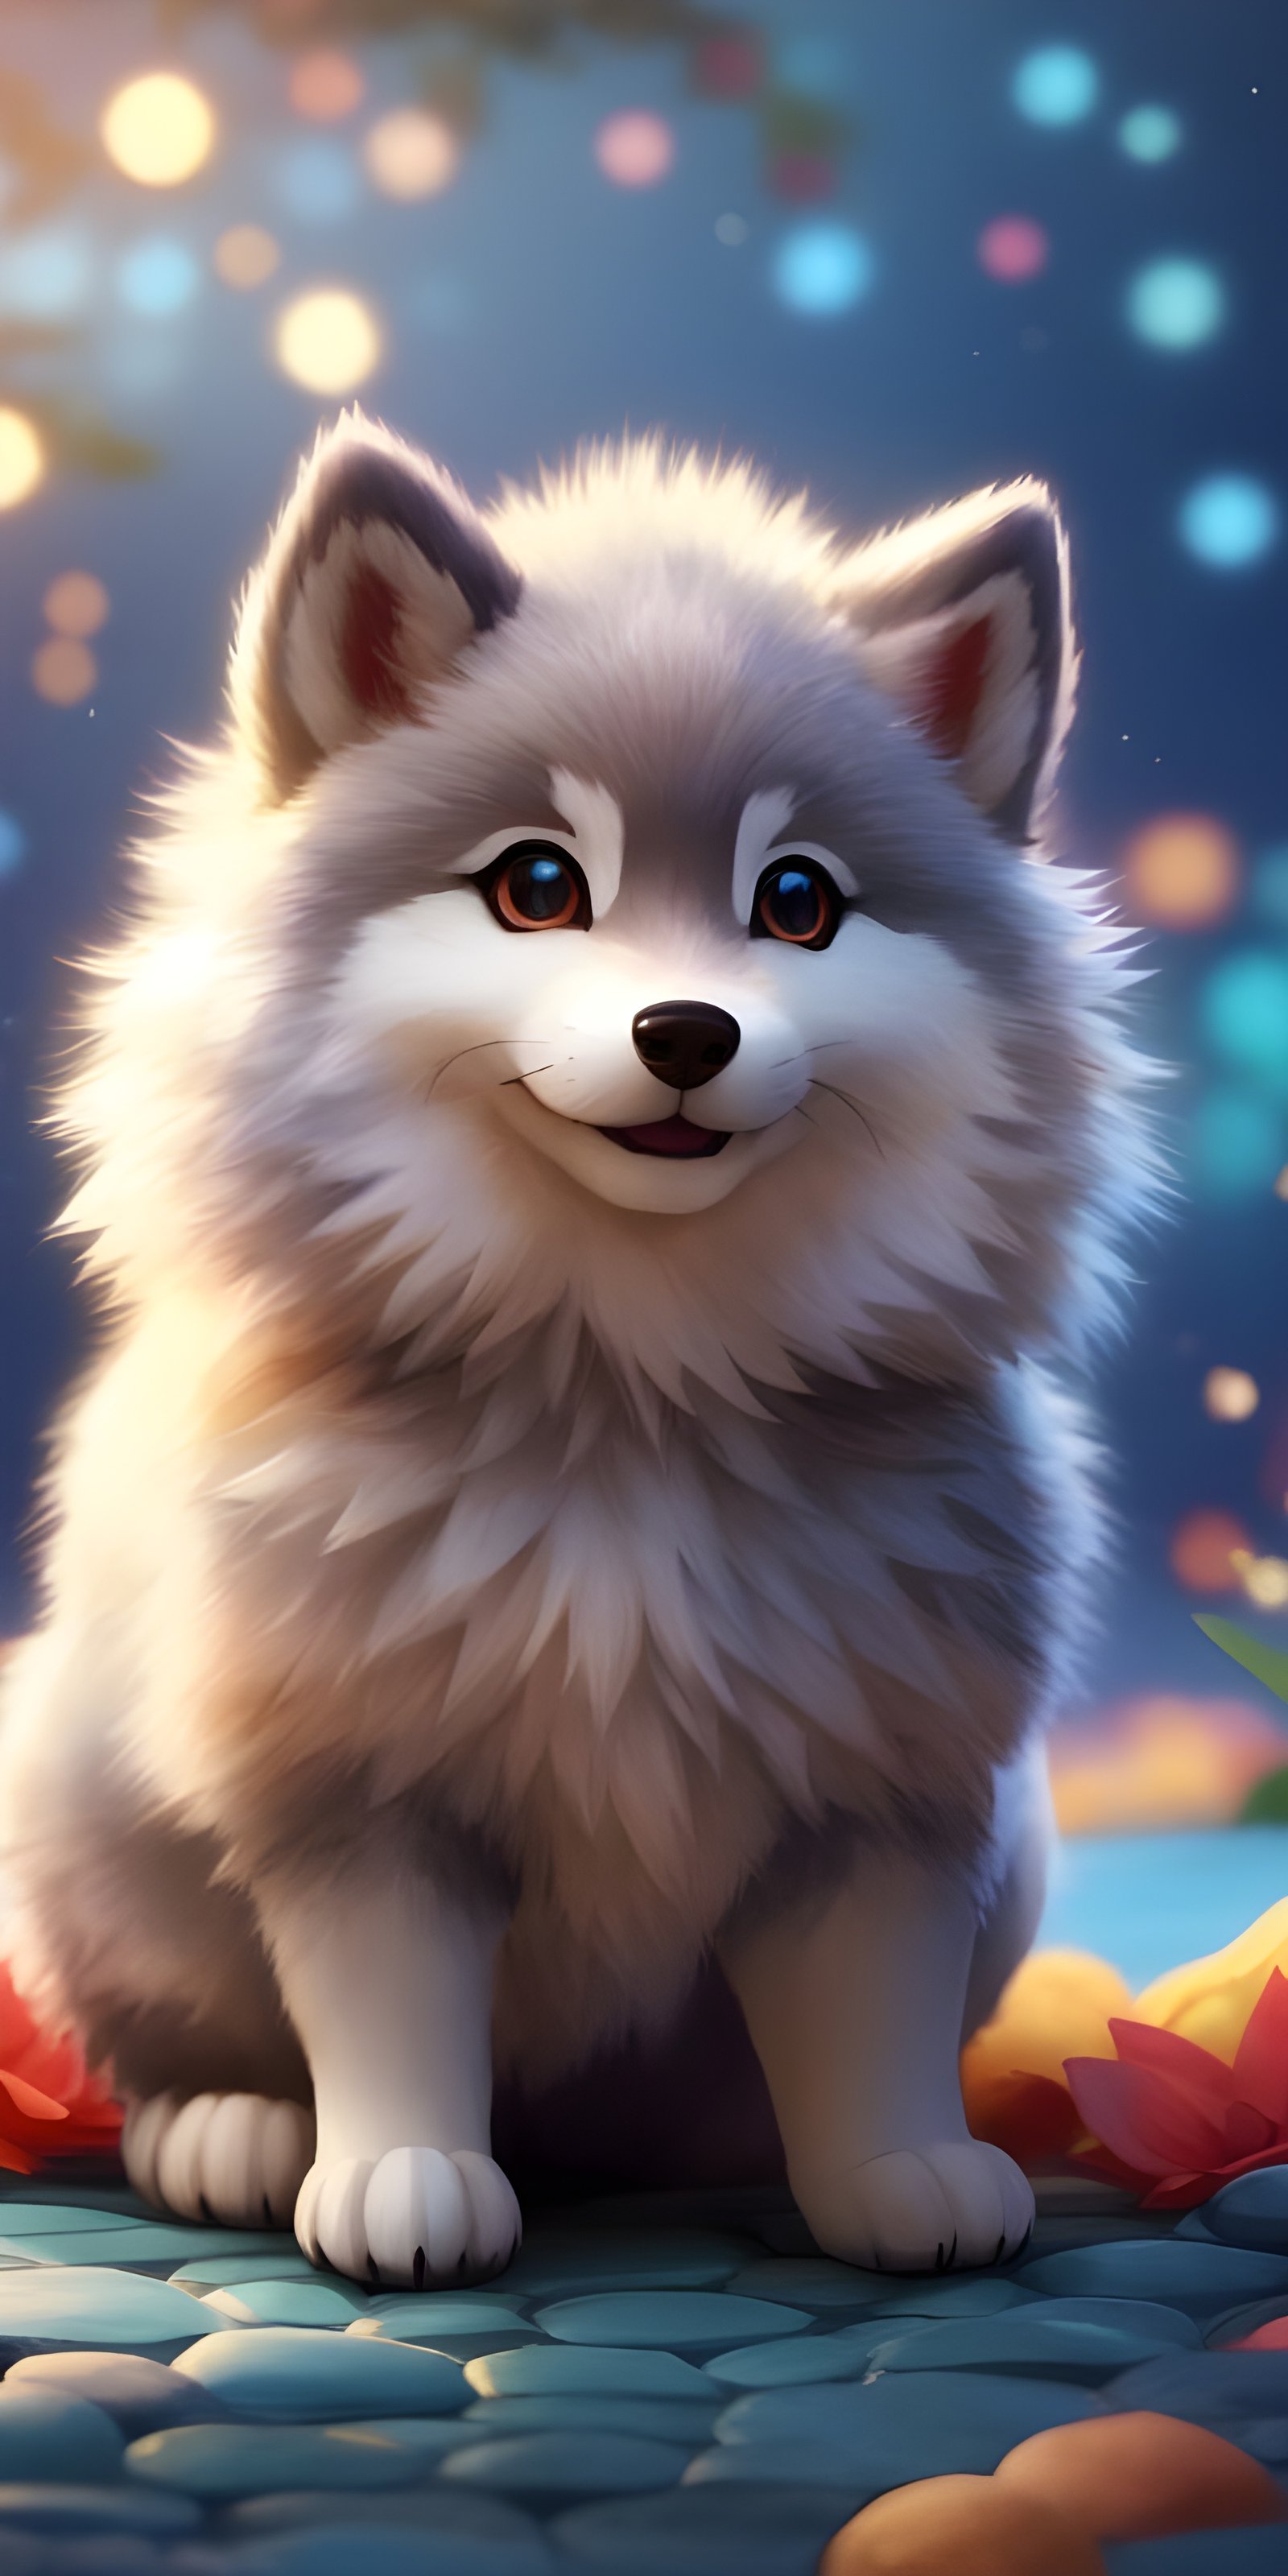 Wolf Cute, Anime, Blue wallpaper for phone, Animal